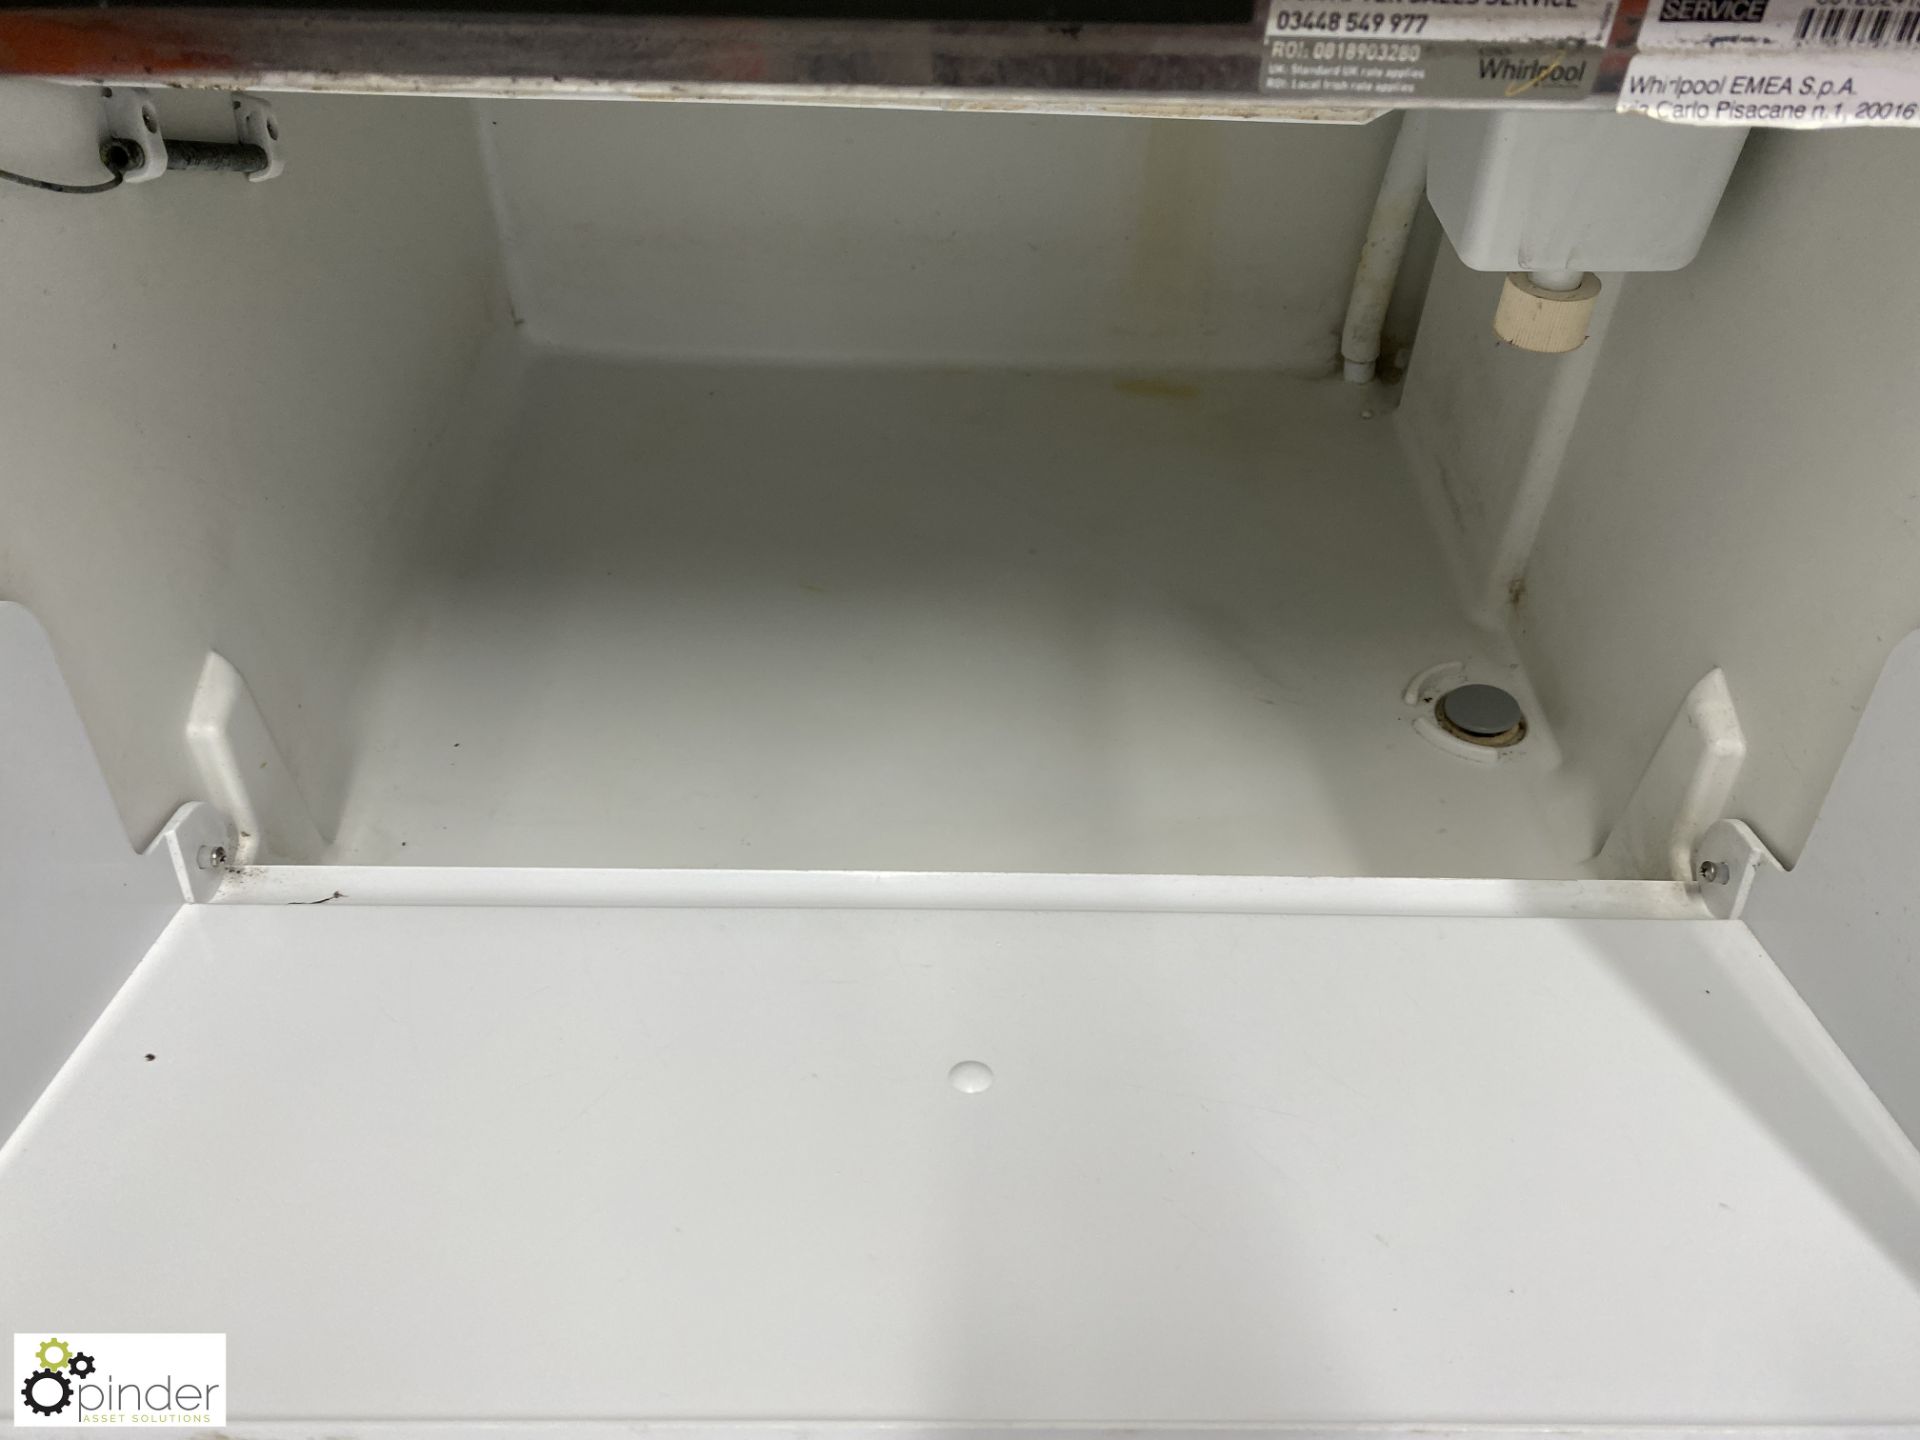 Whirlpool K40 Ice Maker, 555mm x 540mm x 850mm (Lift Out Fee: £15 plus VAT) - Image 3 of 5